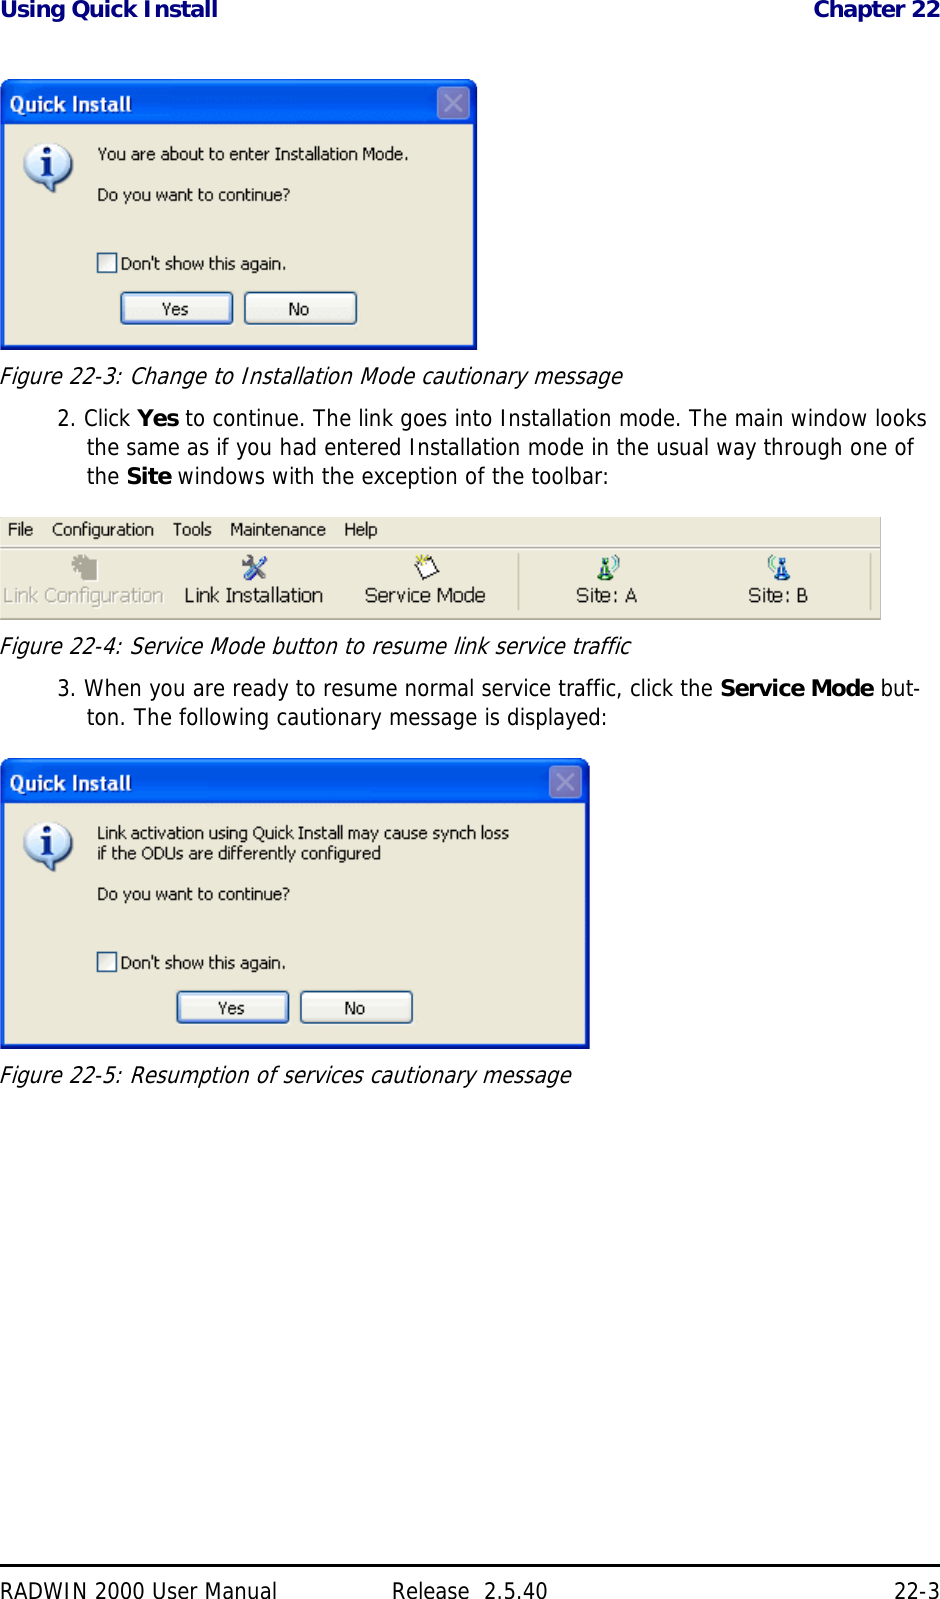 Using Quick Install Chapter 22RADWIN 2000 User Manual Release  2.5.40 22-3Figure 22-3: Change to Installation Mode cautionary message2. Click Yes to continue. The link goes into Installation mode. The main window looks the same as if you had entered Installation mode in the usual way through one of the Site windows with the exception of the toolbar:Figure 22-4: Service Mode button to resume link service traffic3. When you are ready to resume normal service traffic, click the Service Mode but-ton. The following cautionary message is displayed:Figure 22-5: Resumption of services cautionary message